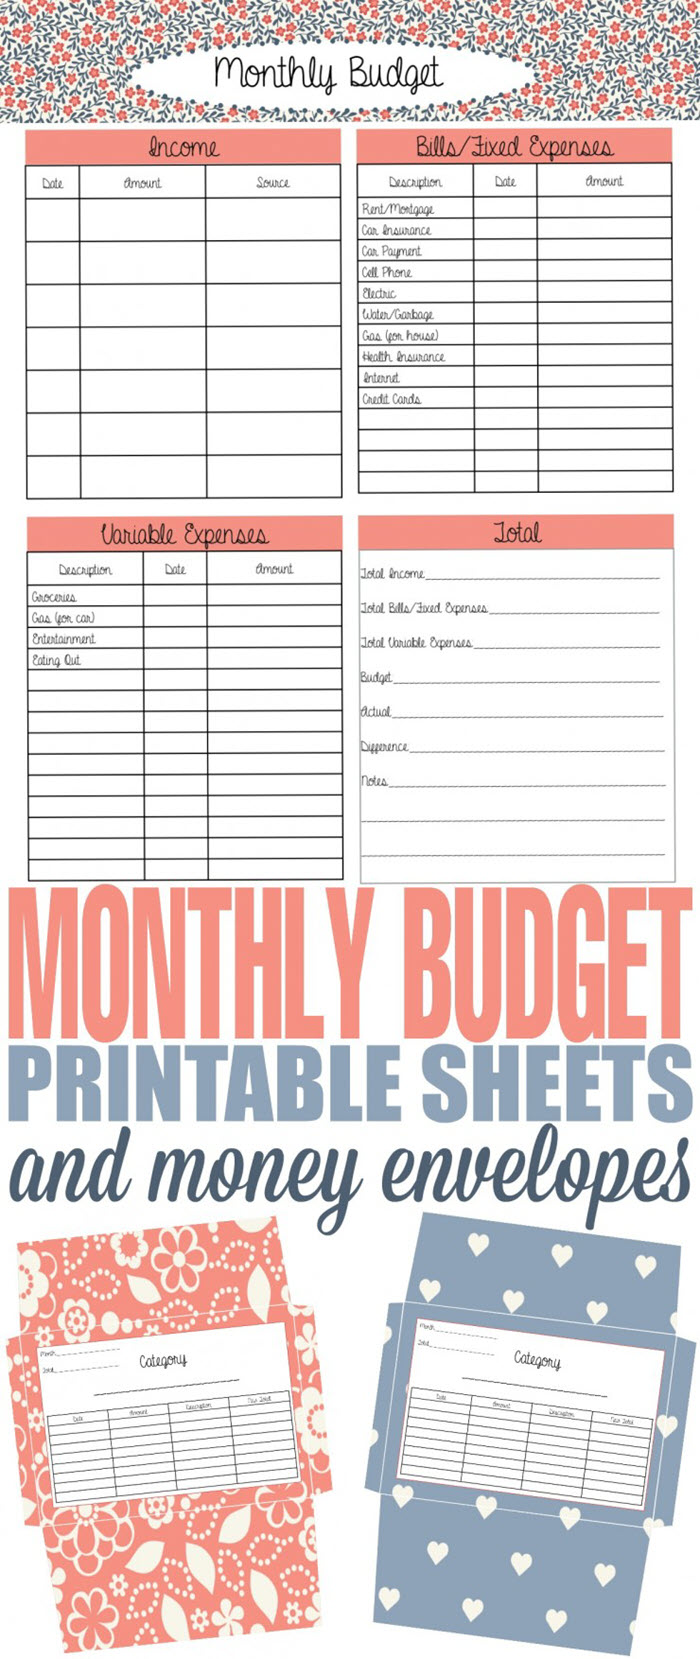 Debt Payoff Printable - Why only track your budget when you can actually plan it ahead? The envelope system will help you accomplish that and these cute printables are the perfect way to apply it!